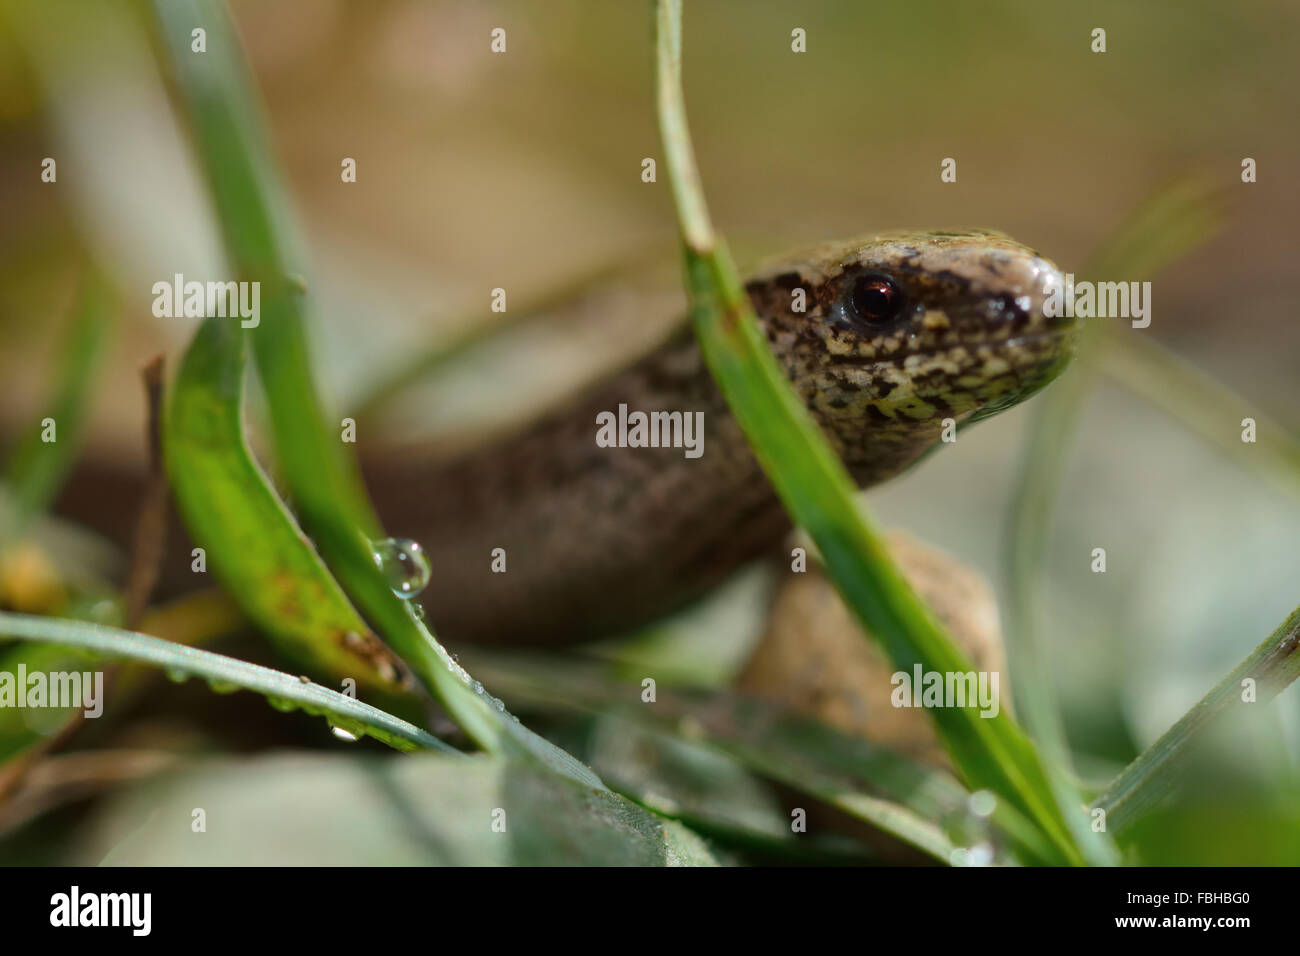 Slow worm (Anguis fragilis) close-up amongst grass. A legless lizard shown amongst grass, with a shallow focus on the eye Stock Photo